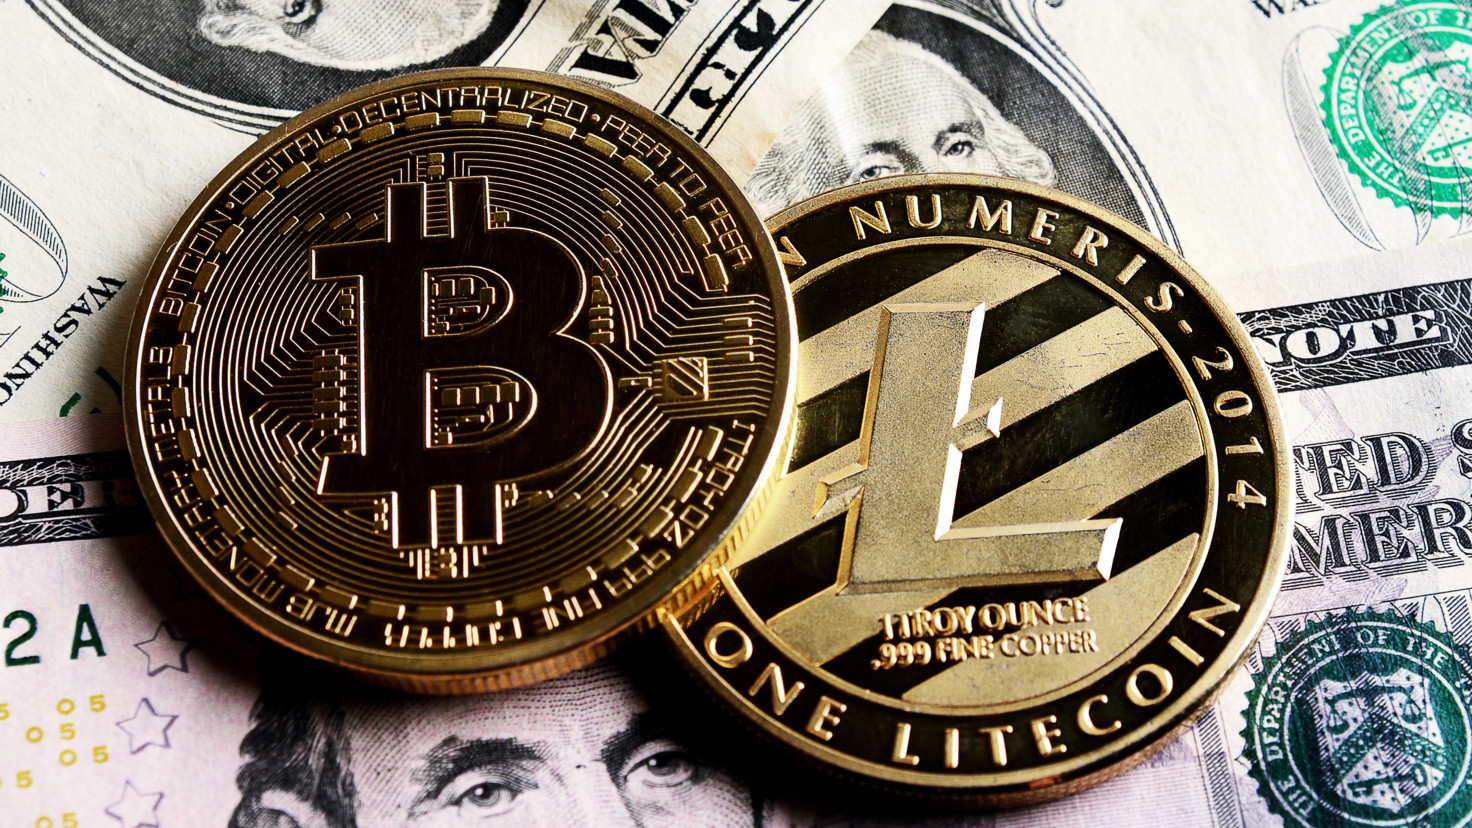 Differences Between Bitcoin and Litecoin